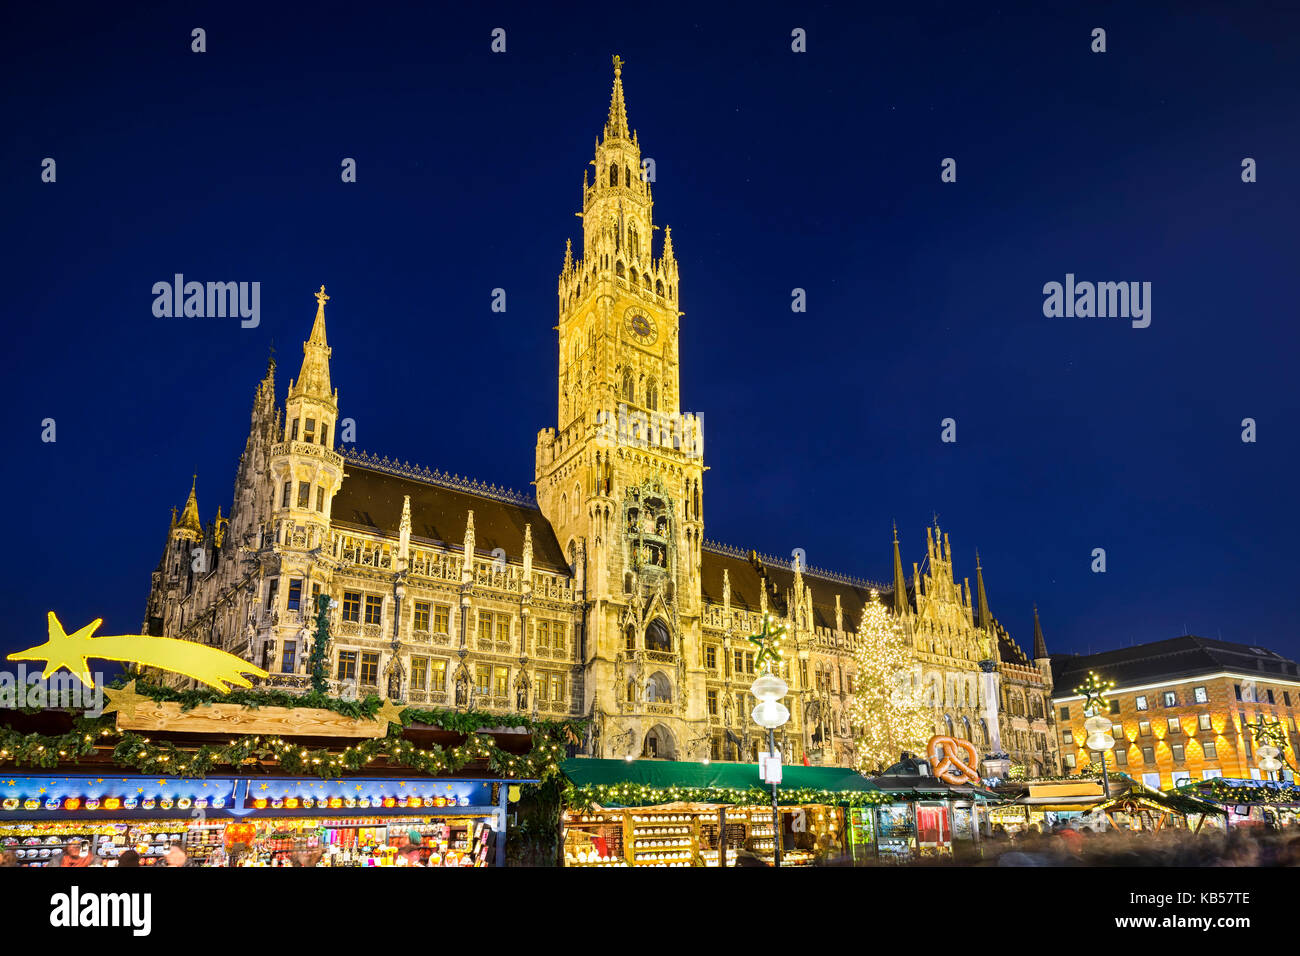 City Hall and Christmas market at night in Munich, Germany Stock Photo